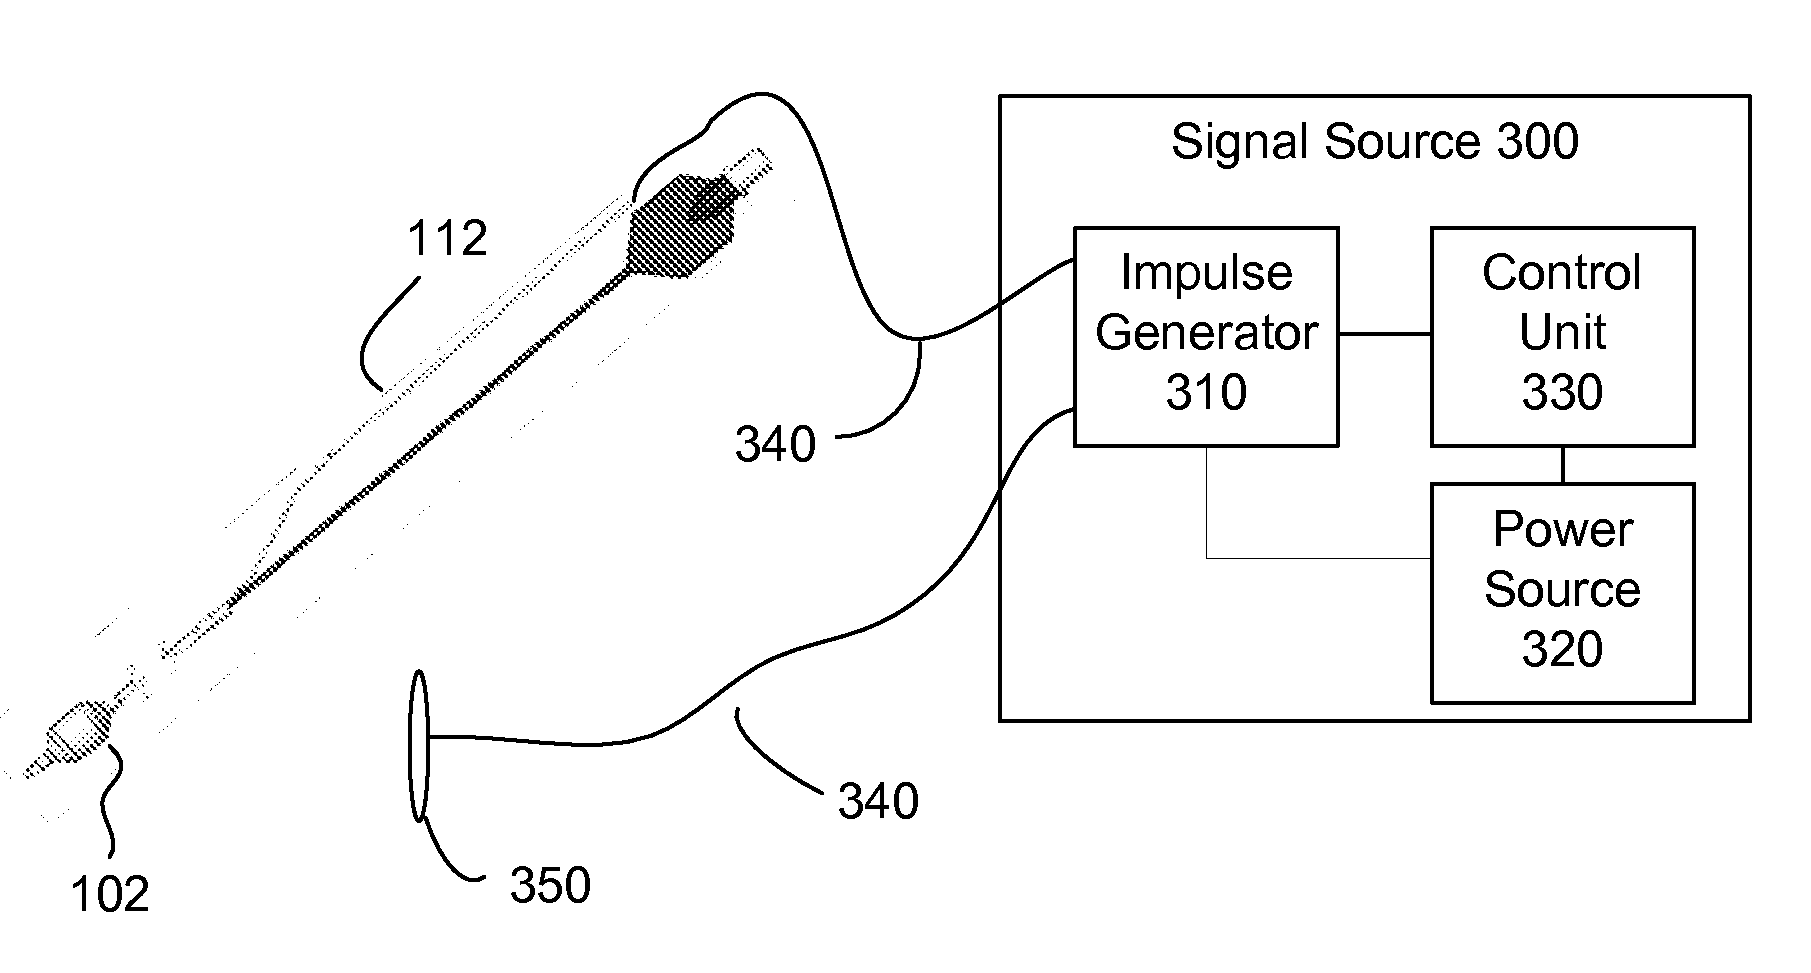 Methods and apparatus for electrical stimulation treatment using esophageal balloon and electrode